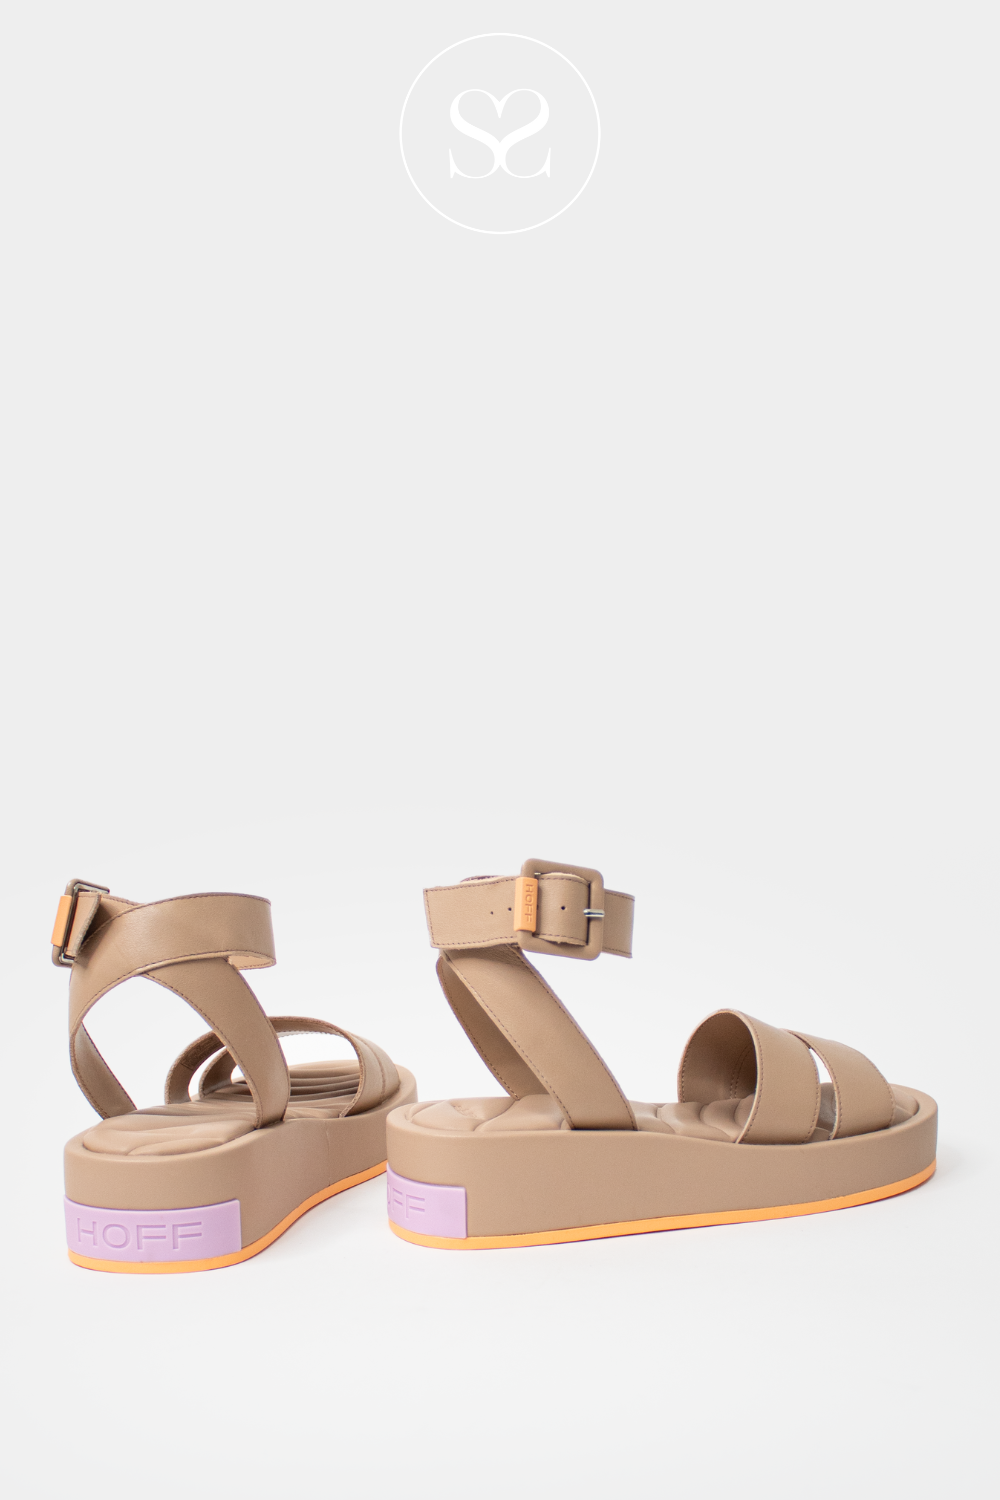 CHUNKY FLATFORM SANDALS FOR WOMEN IN TAUPE LEATHER FROM HOFF